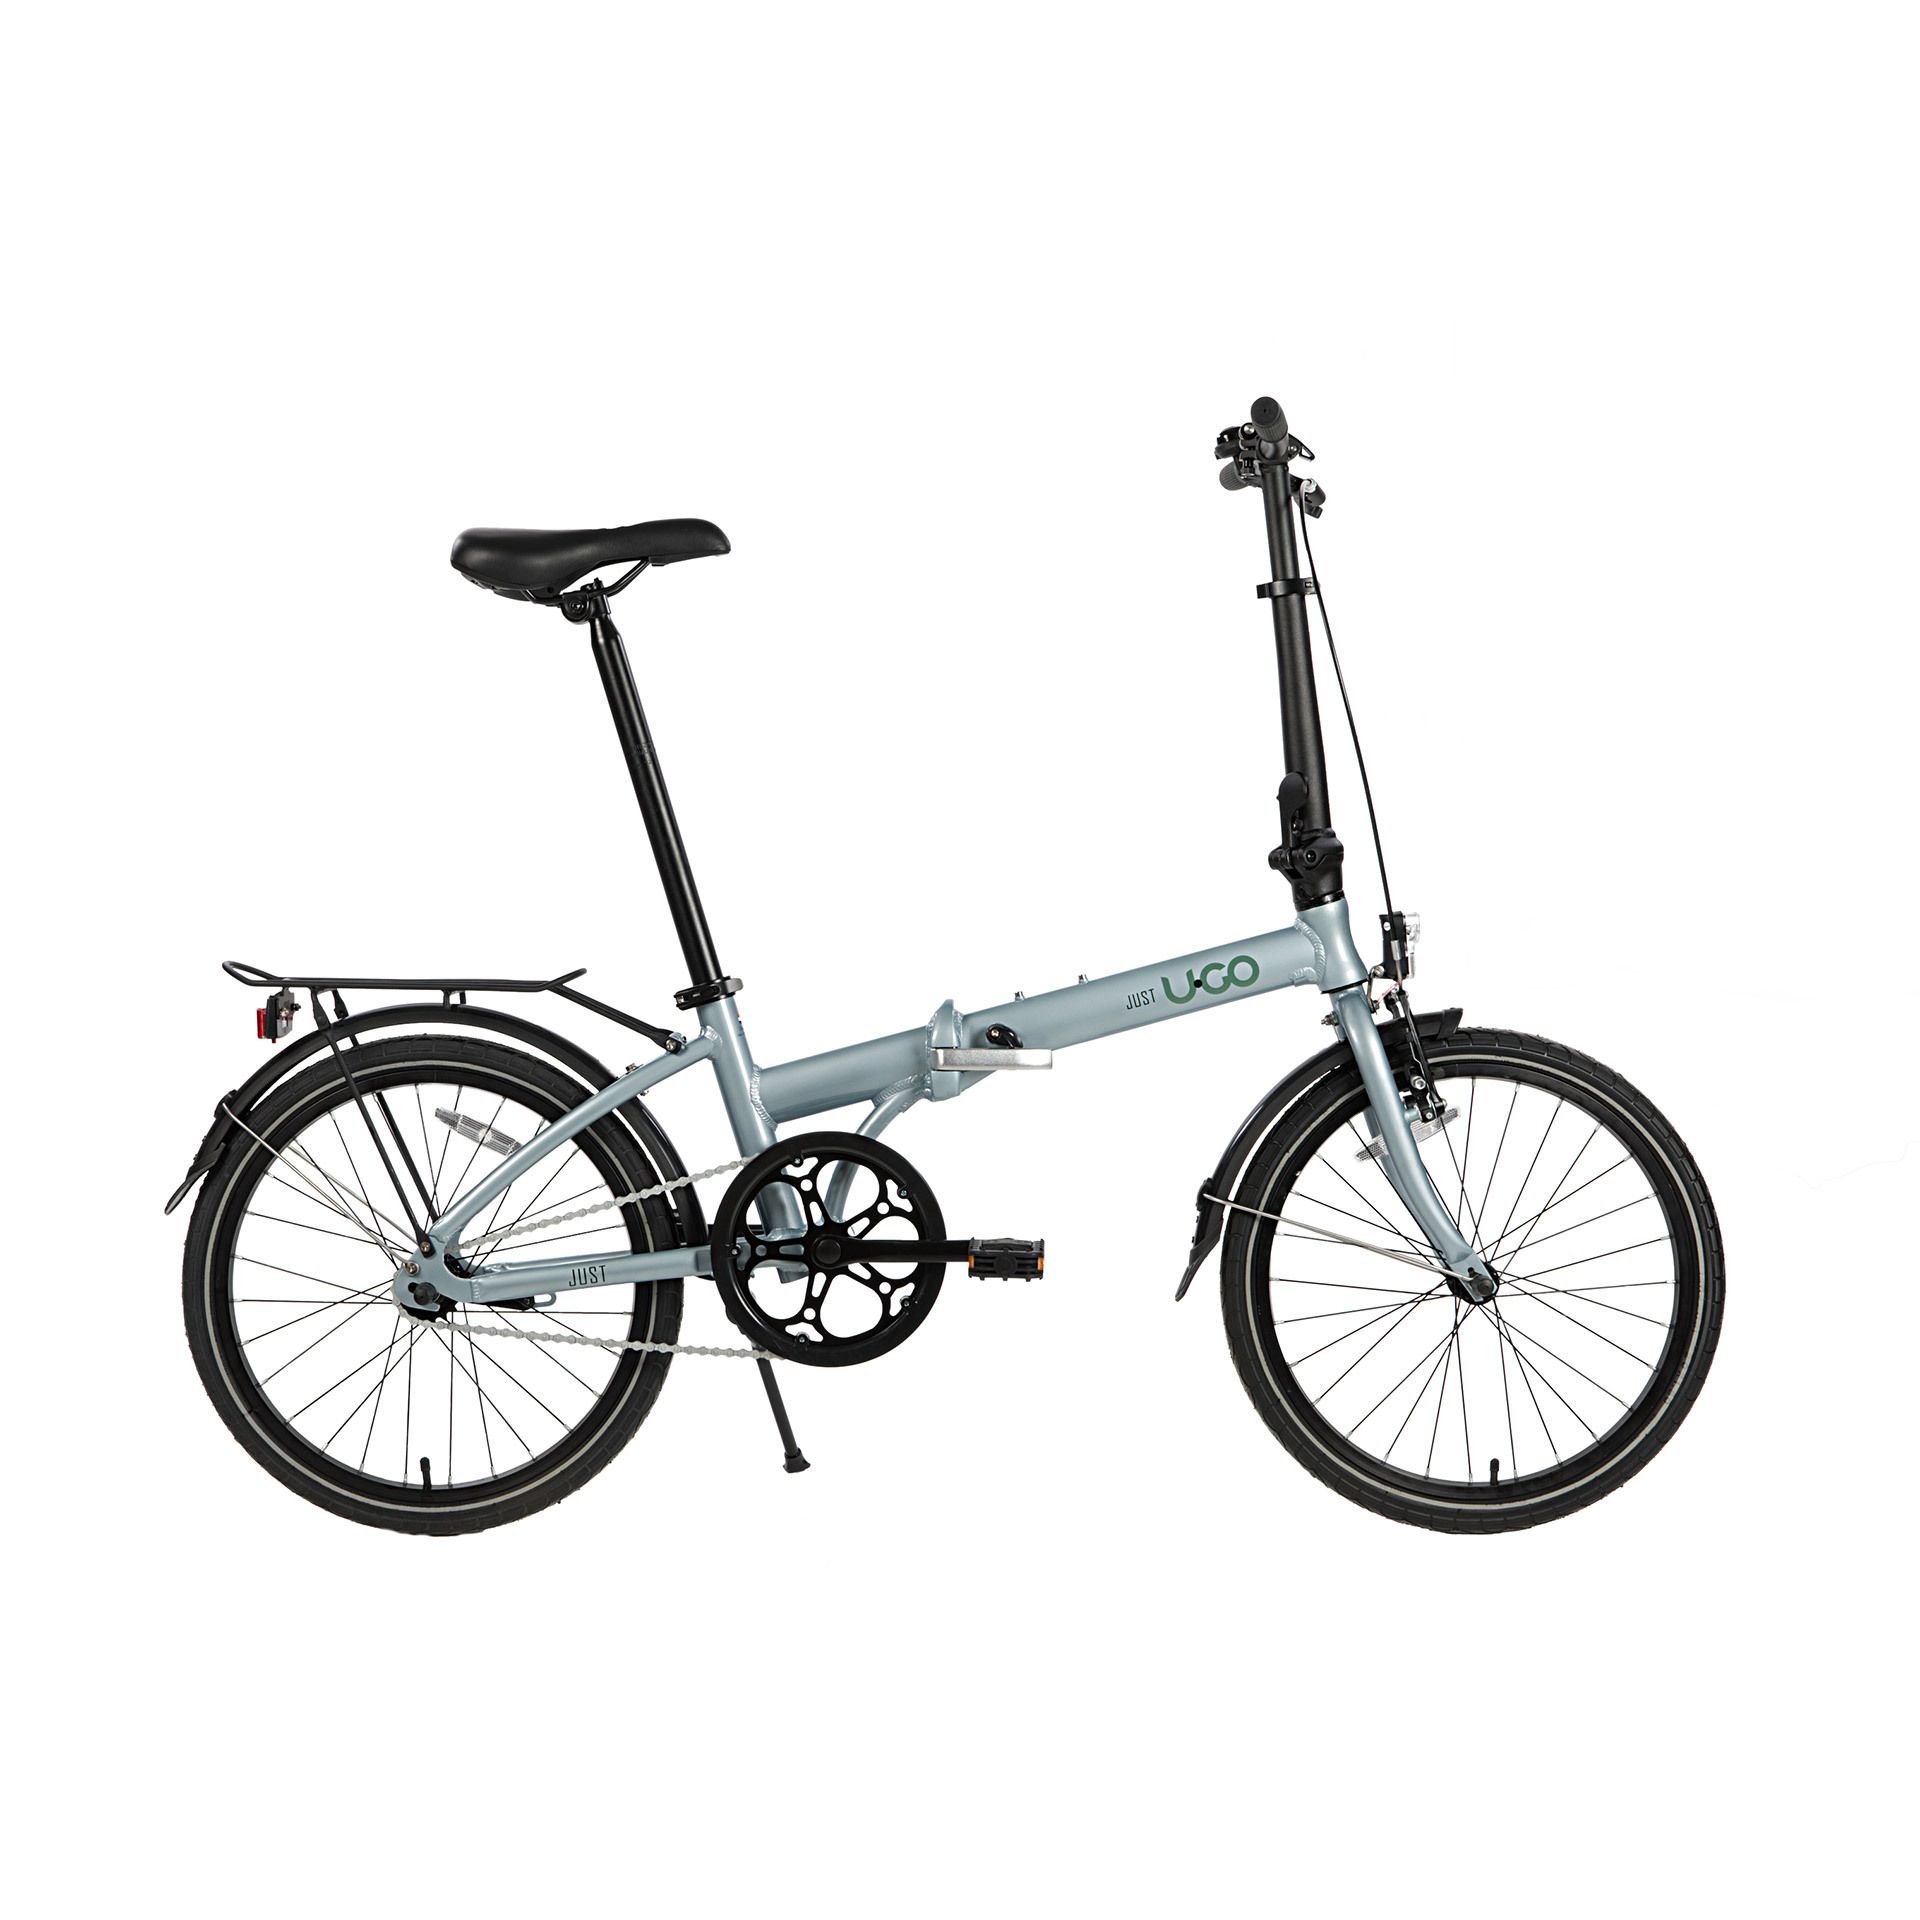 UGO JUST S1 Vouwfiets 20inch Misty grey